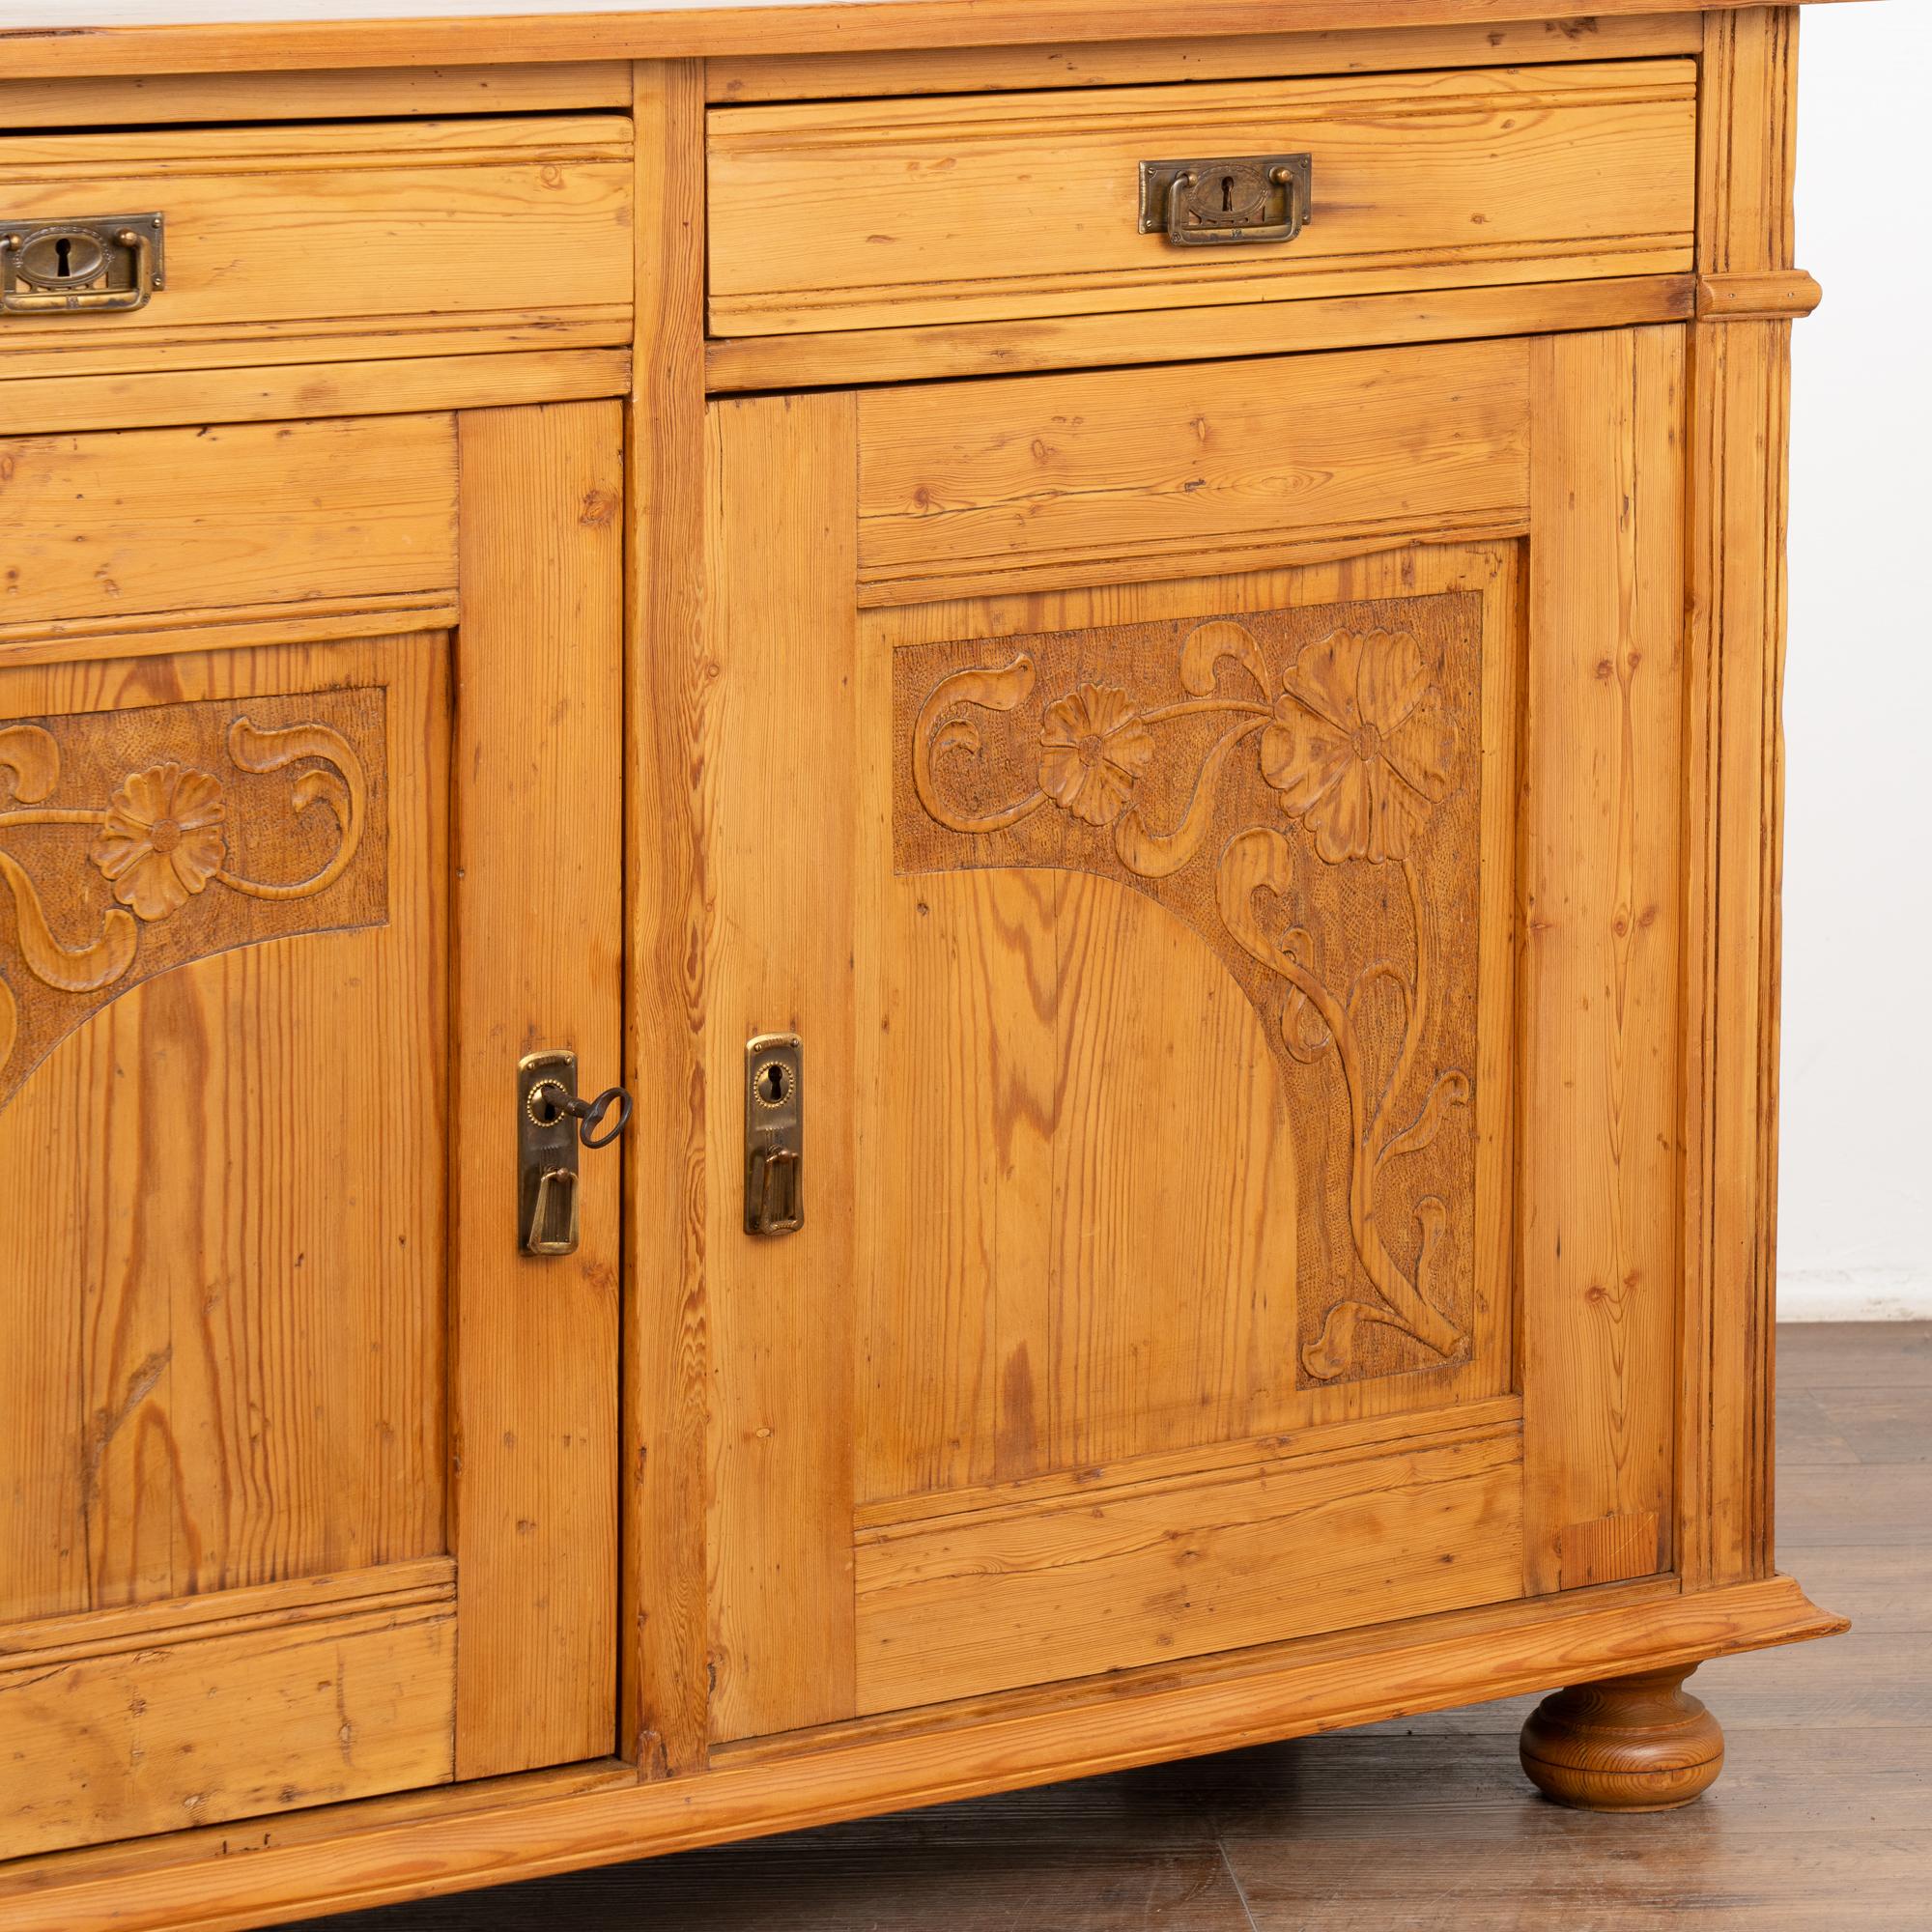 19th Century Pine Sideboard Cabinet With Floral Carving, Denmark circa 1890